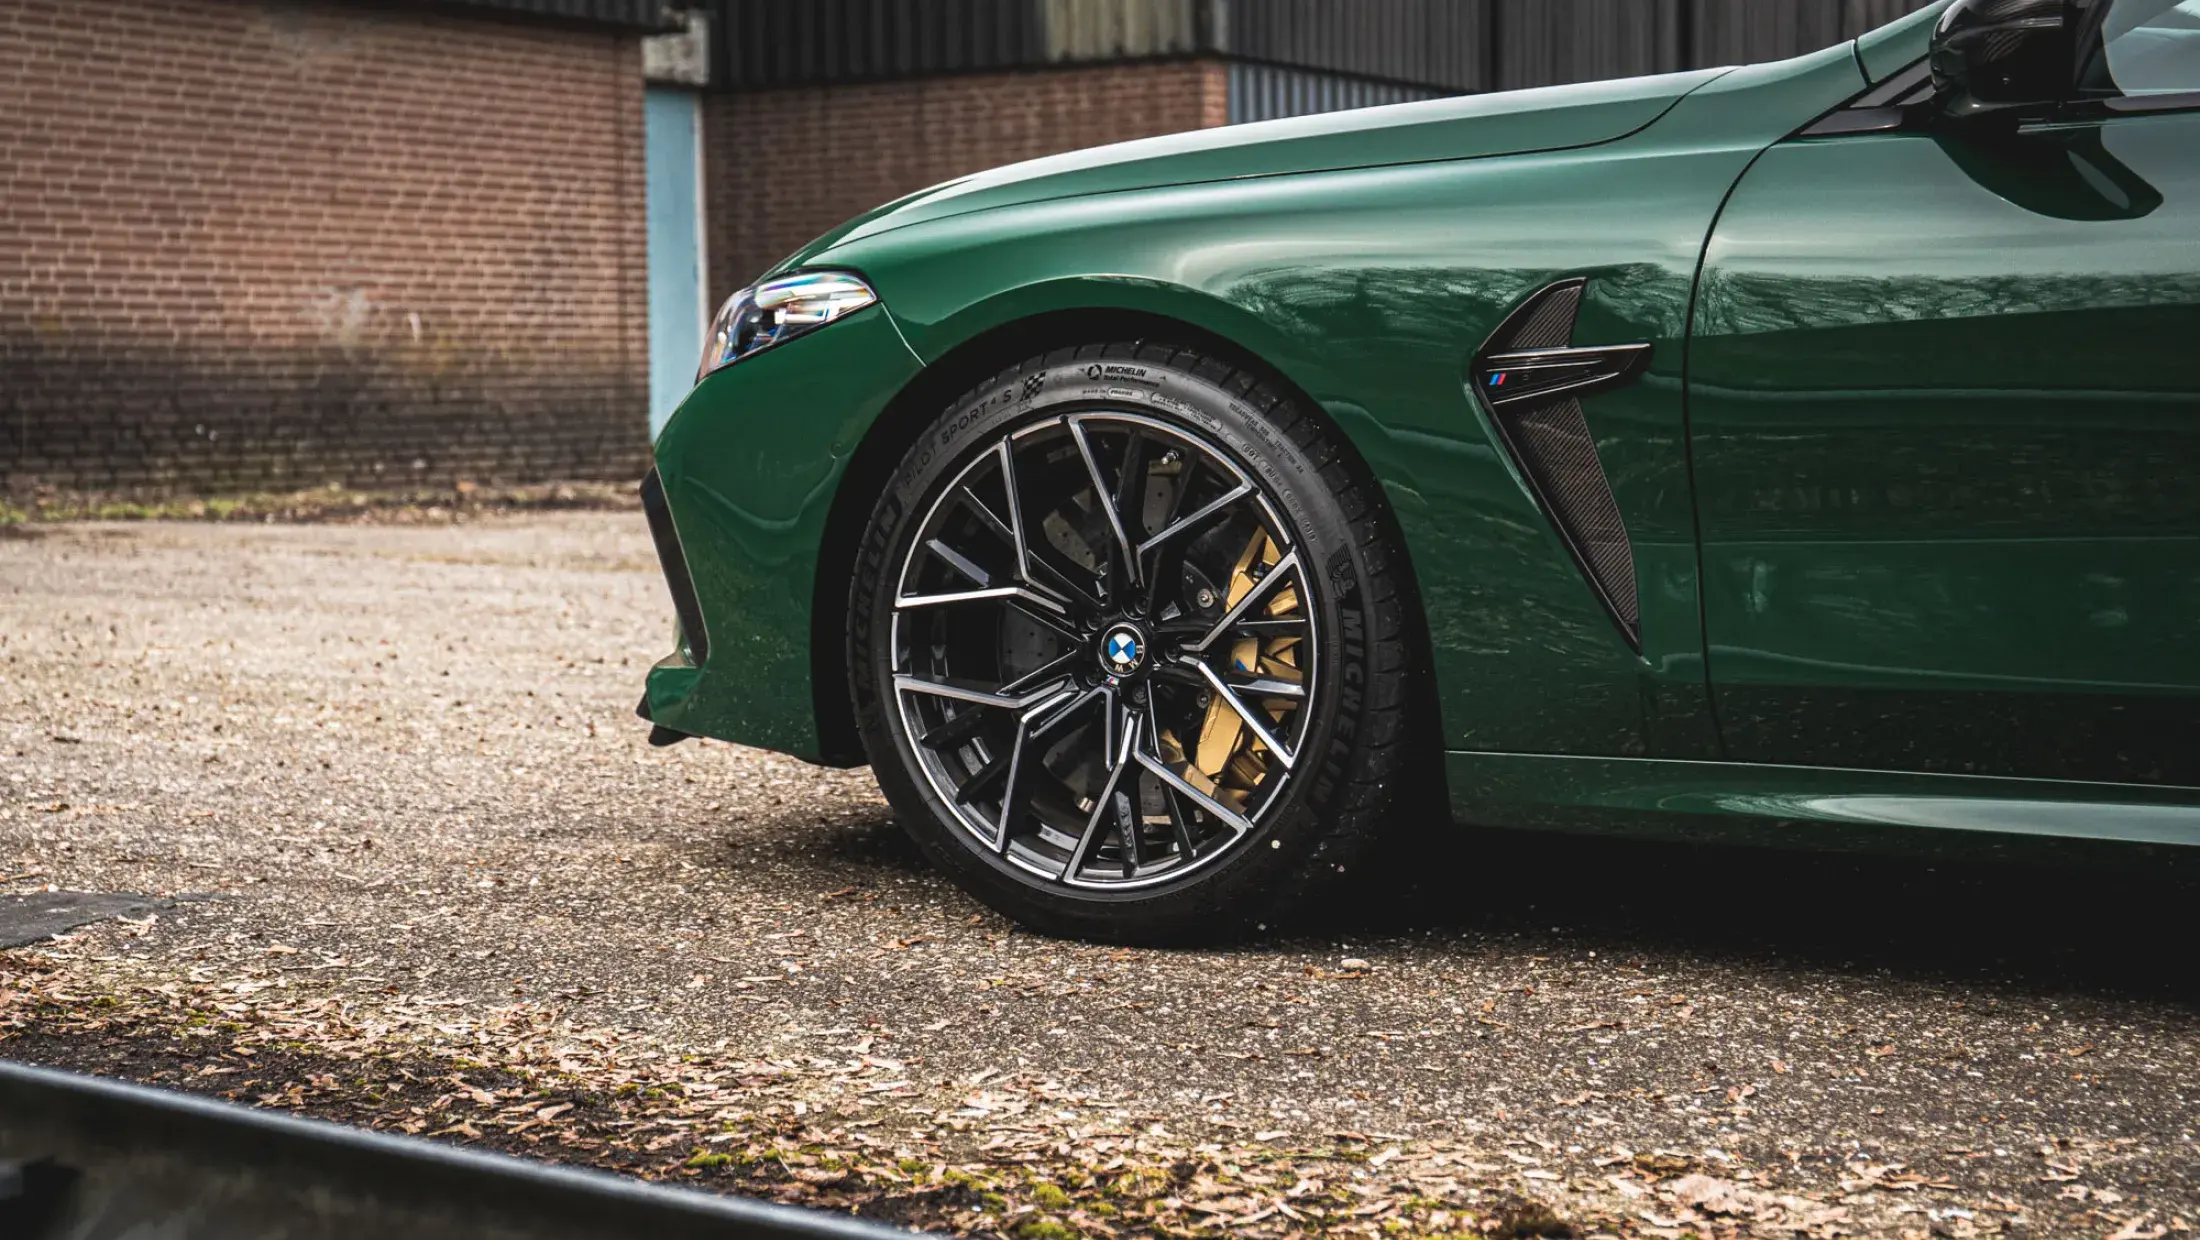 We drove an Irish Green BMW M8 Gran Coupé Competition for St. Patrick's Day